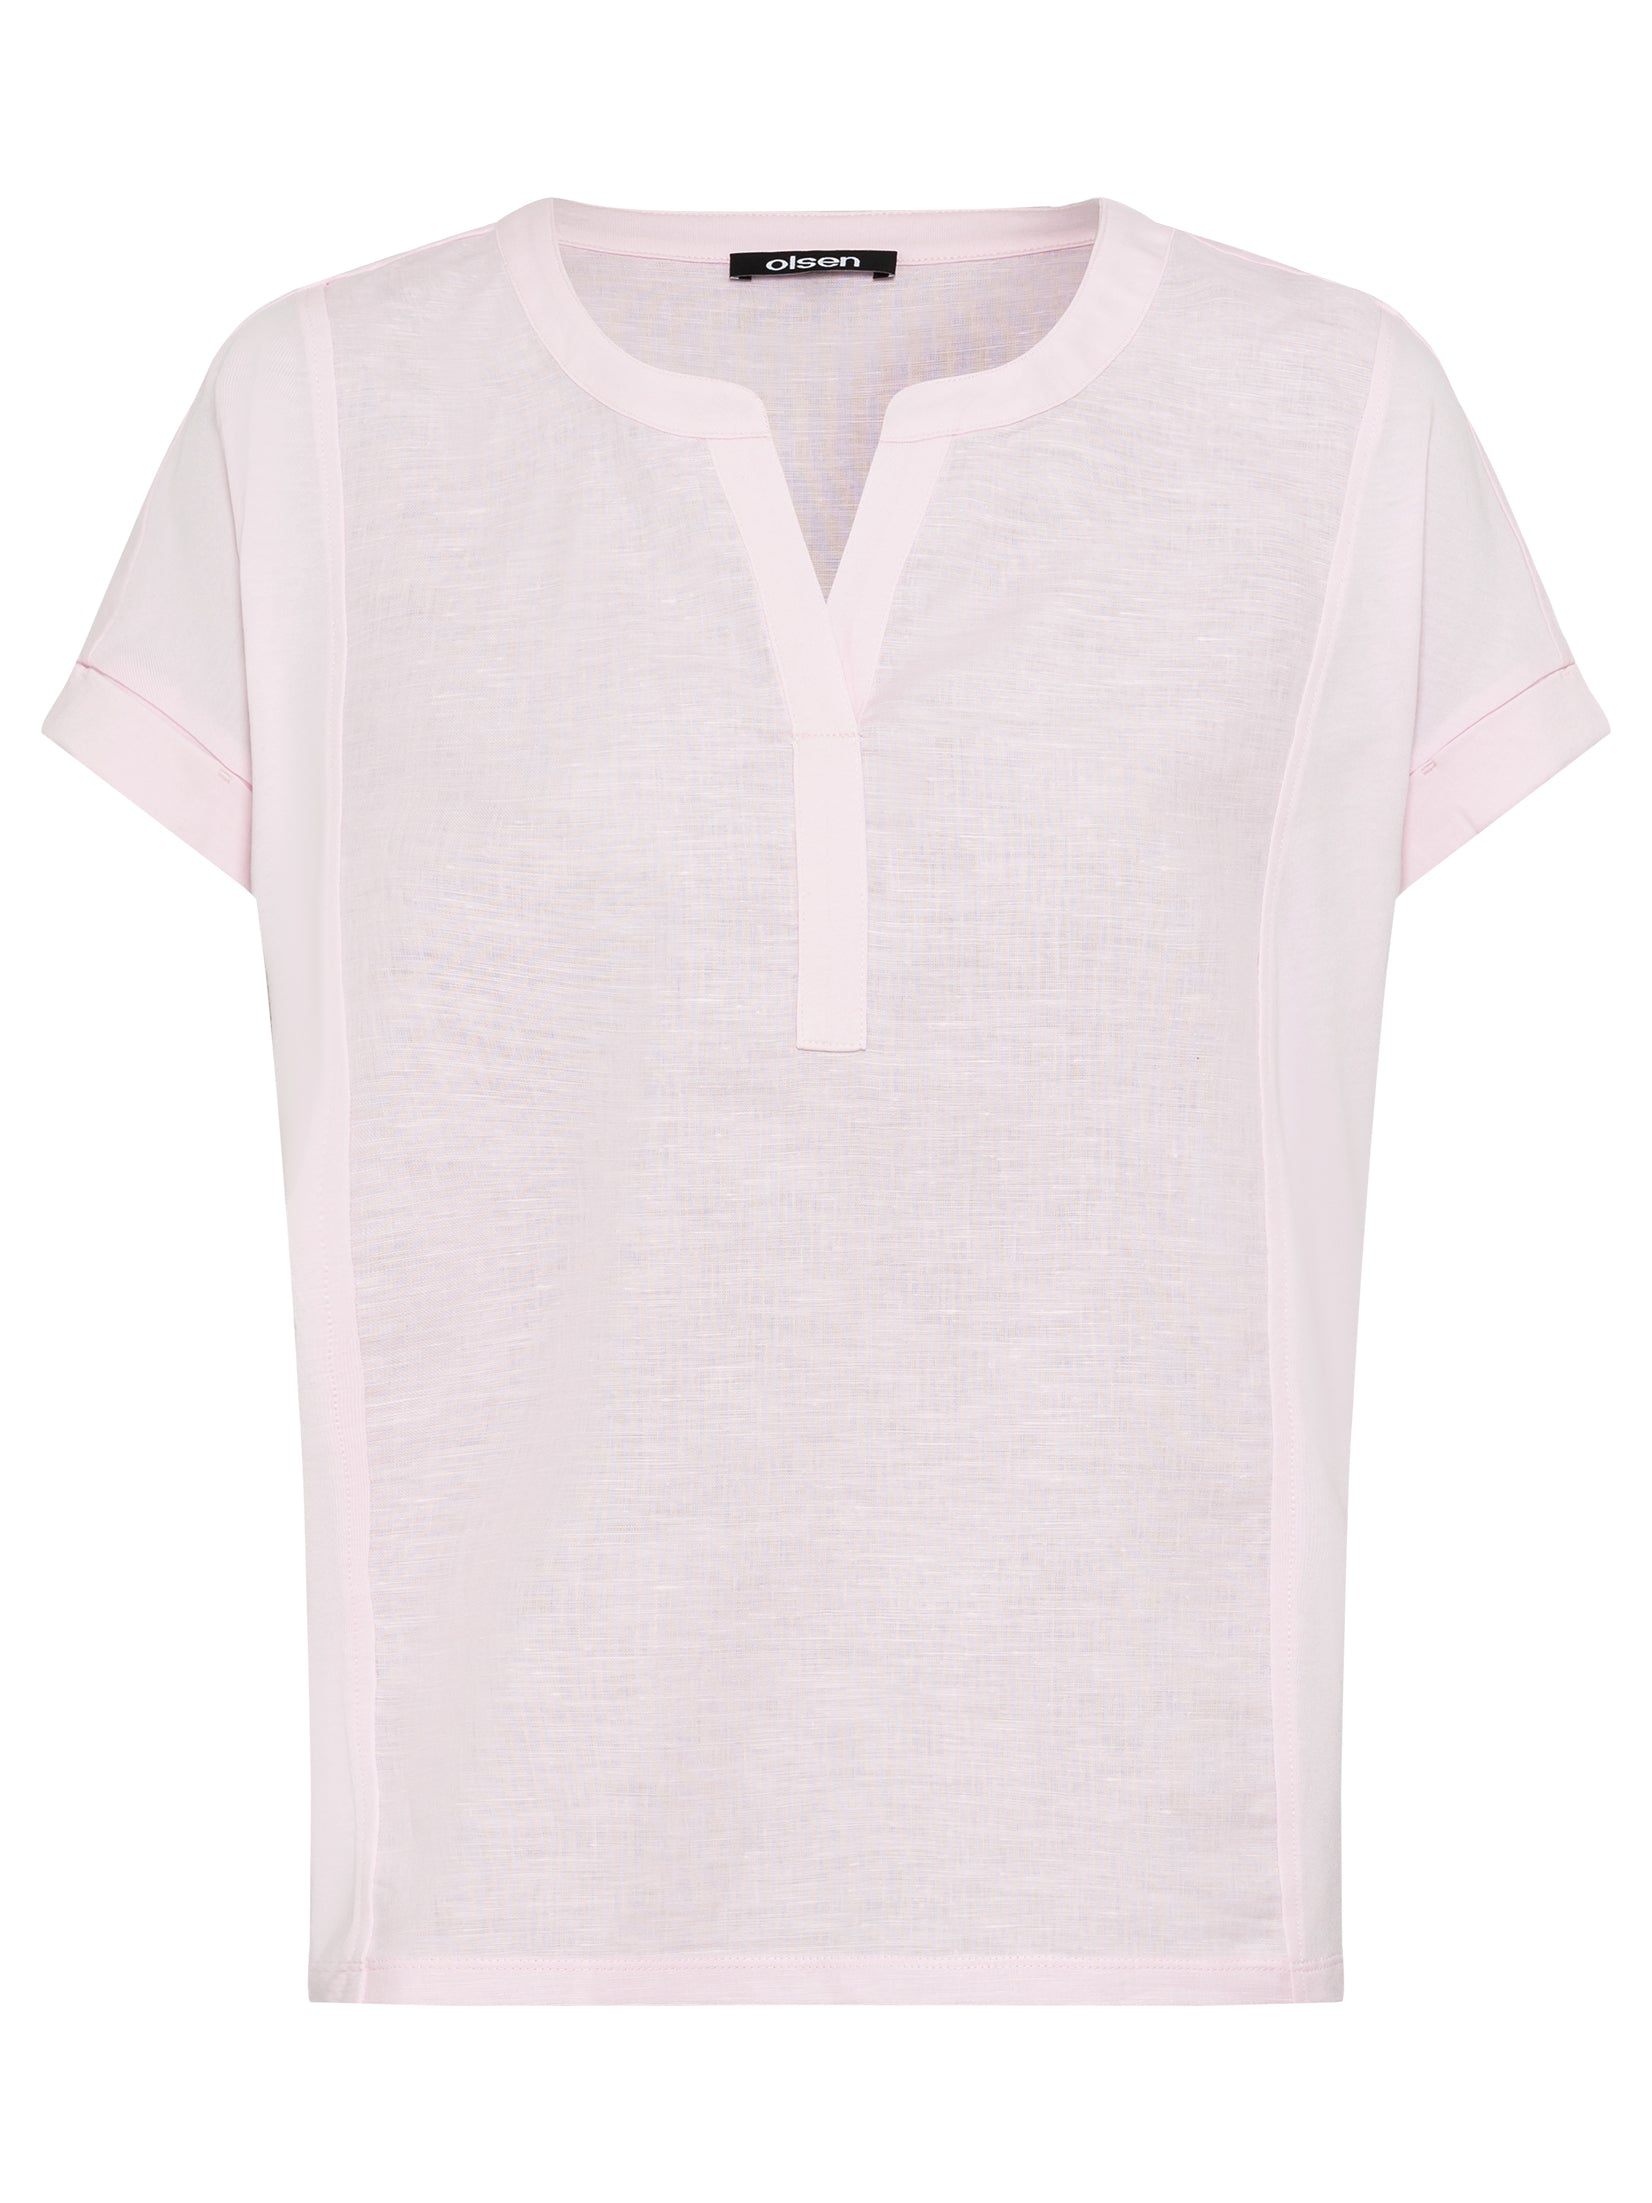 Short Sleeve T-Shirt in Rosey Pink